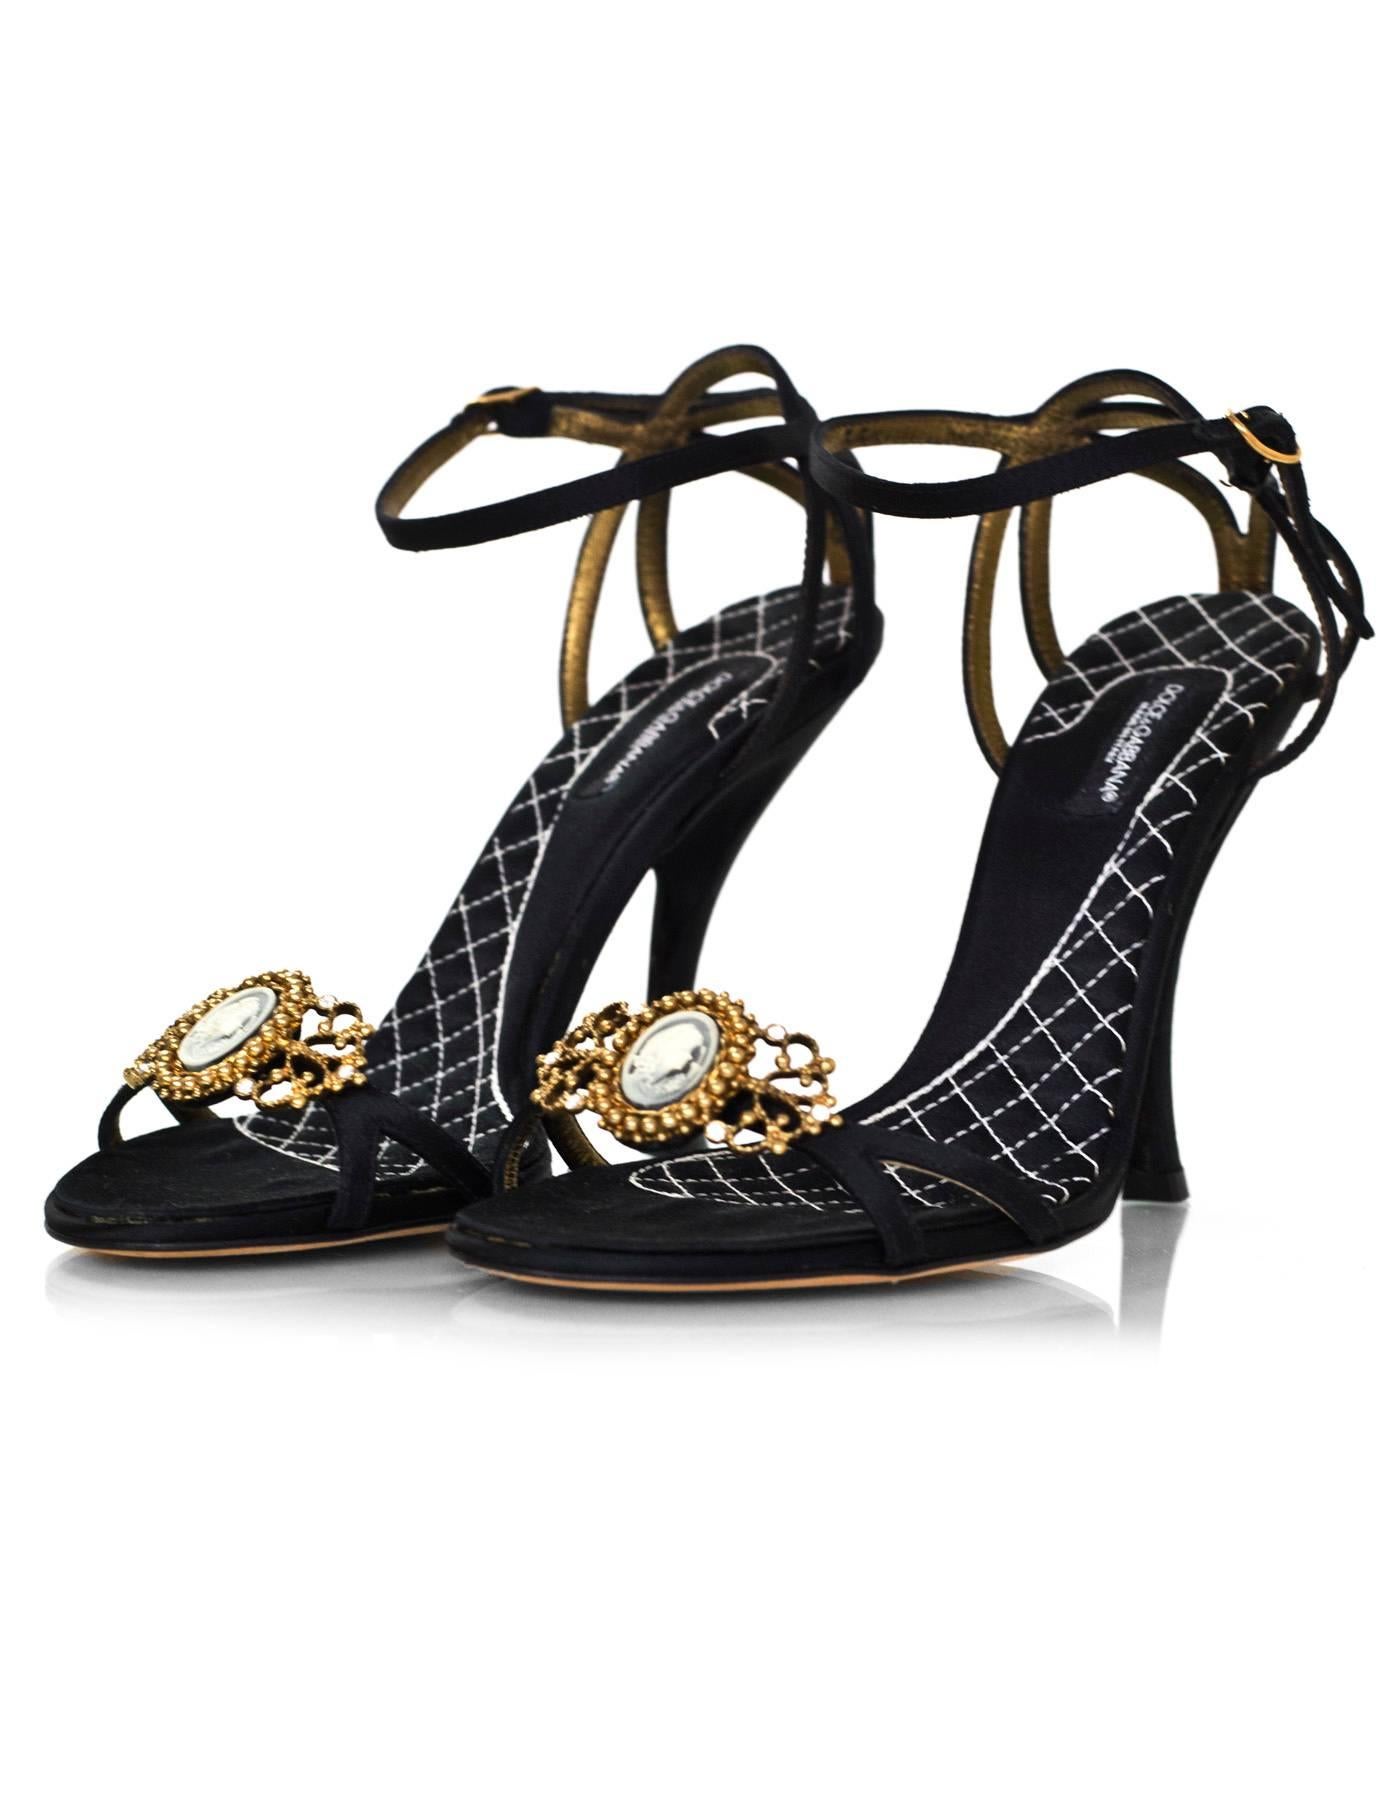 Dolce & Gabbana Black Satin Cameo Sandals Sz 35.5

Made In: Italy
Color: Black
Materials: Satin, metal, crystal
Closure/Opening: Buckle closure at ankle
Sole Stamp: DG Vero Cuoio Made in Italy 35.5
Overall Condition: Excellent pre-owned condition